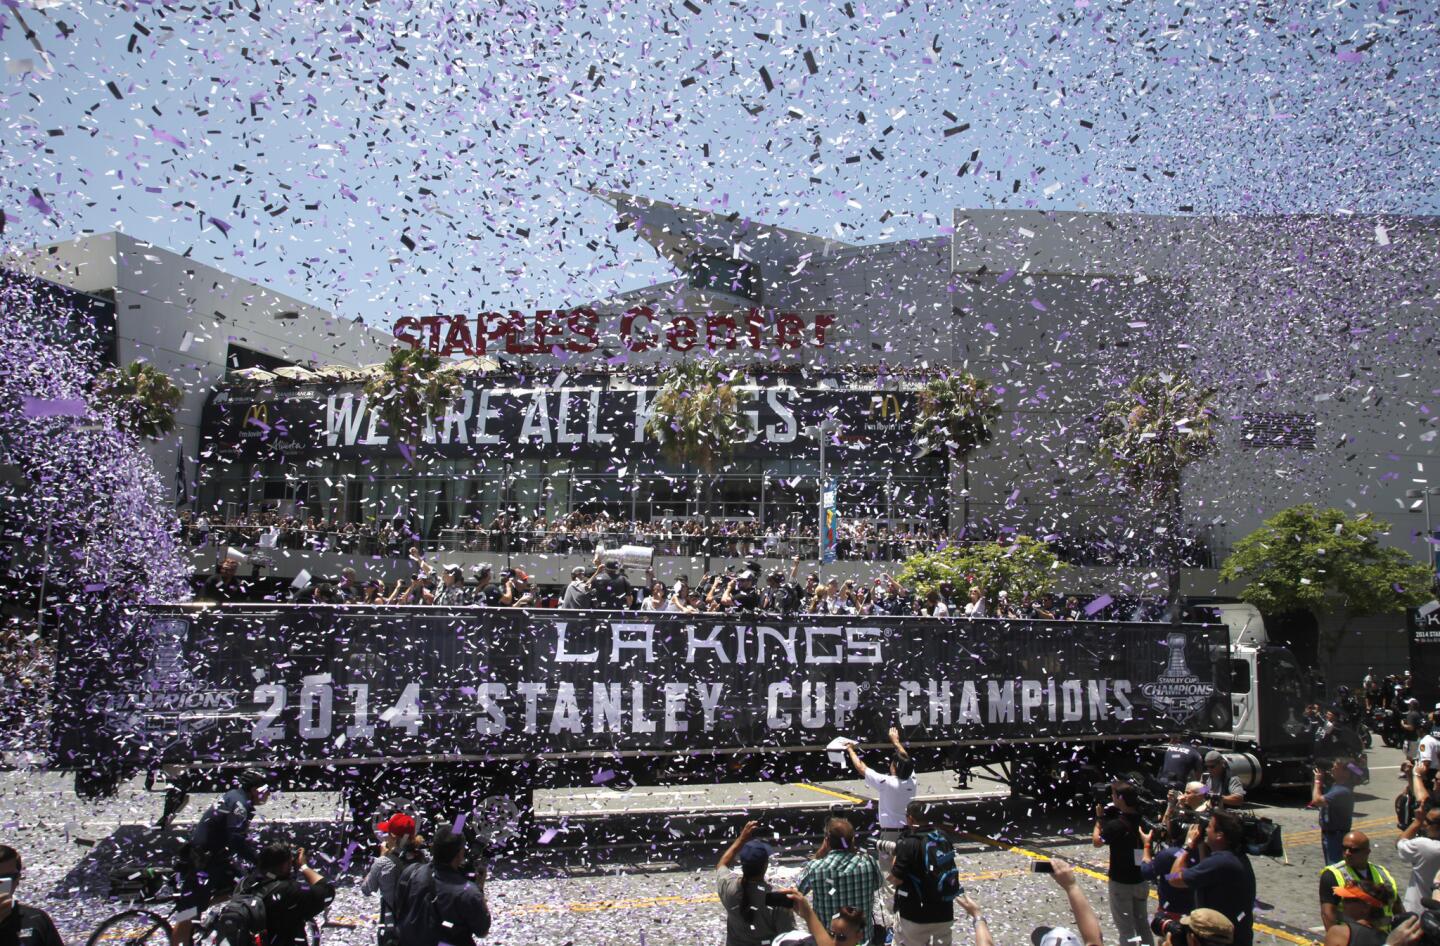 Kings fans celebrate the 2014 Stanley Cup